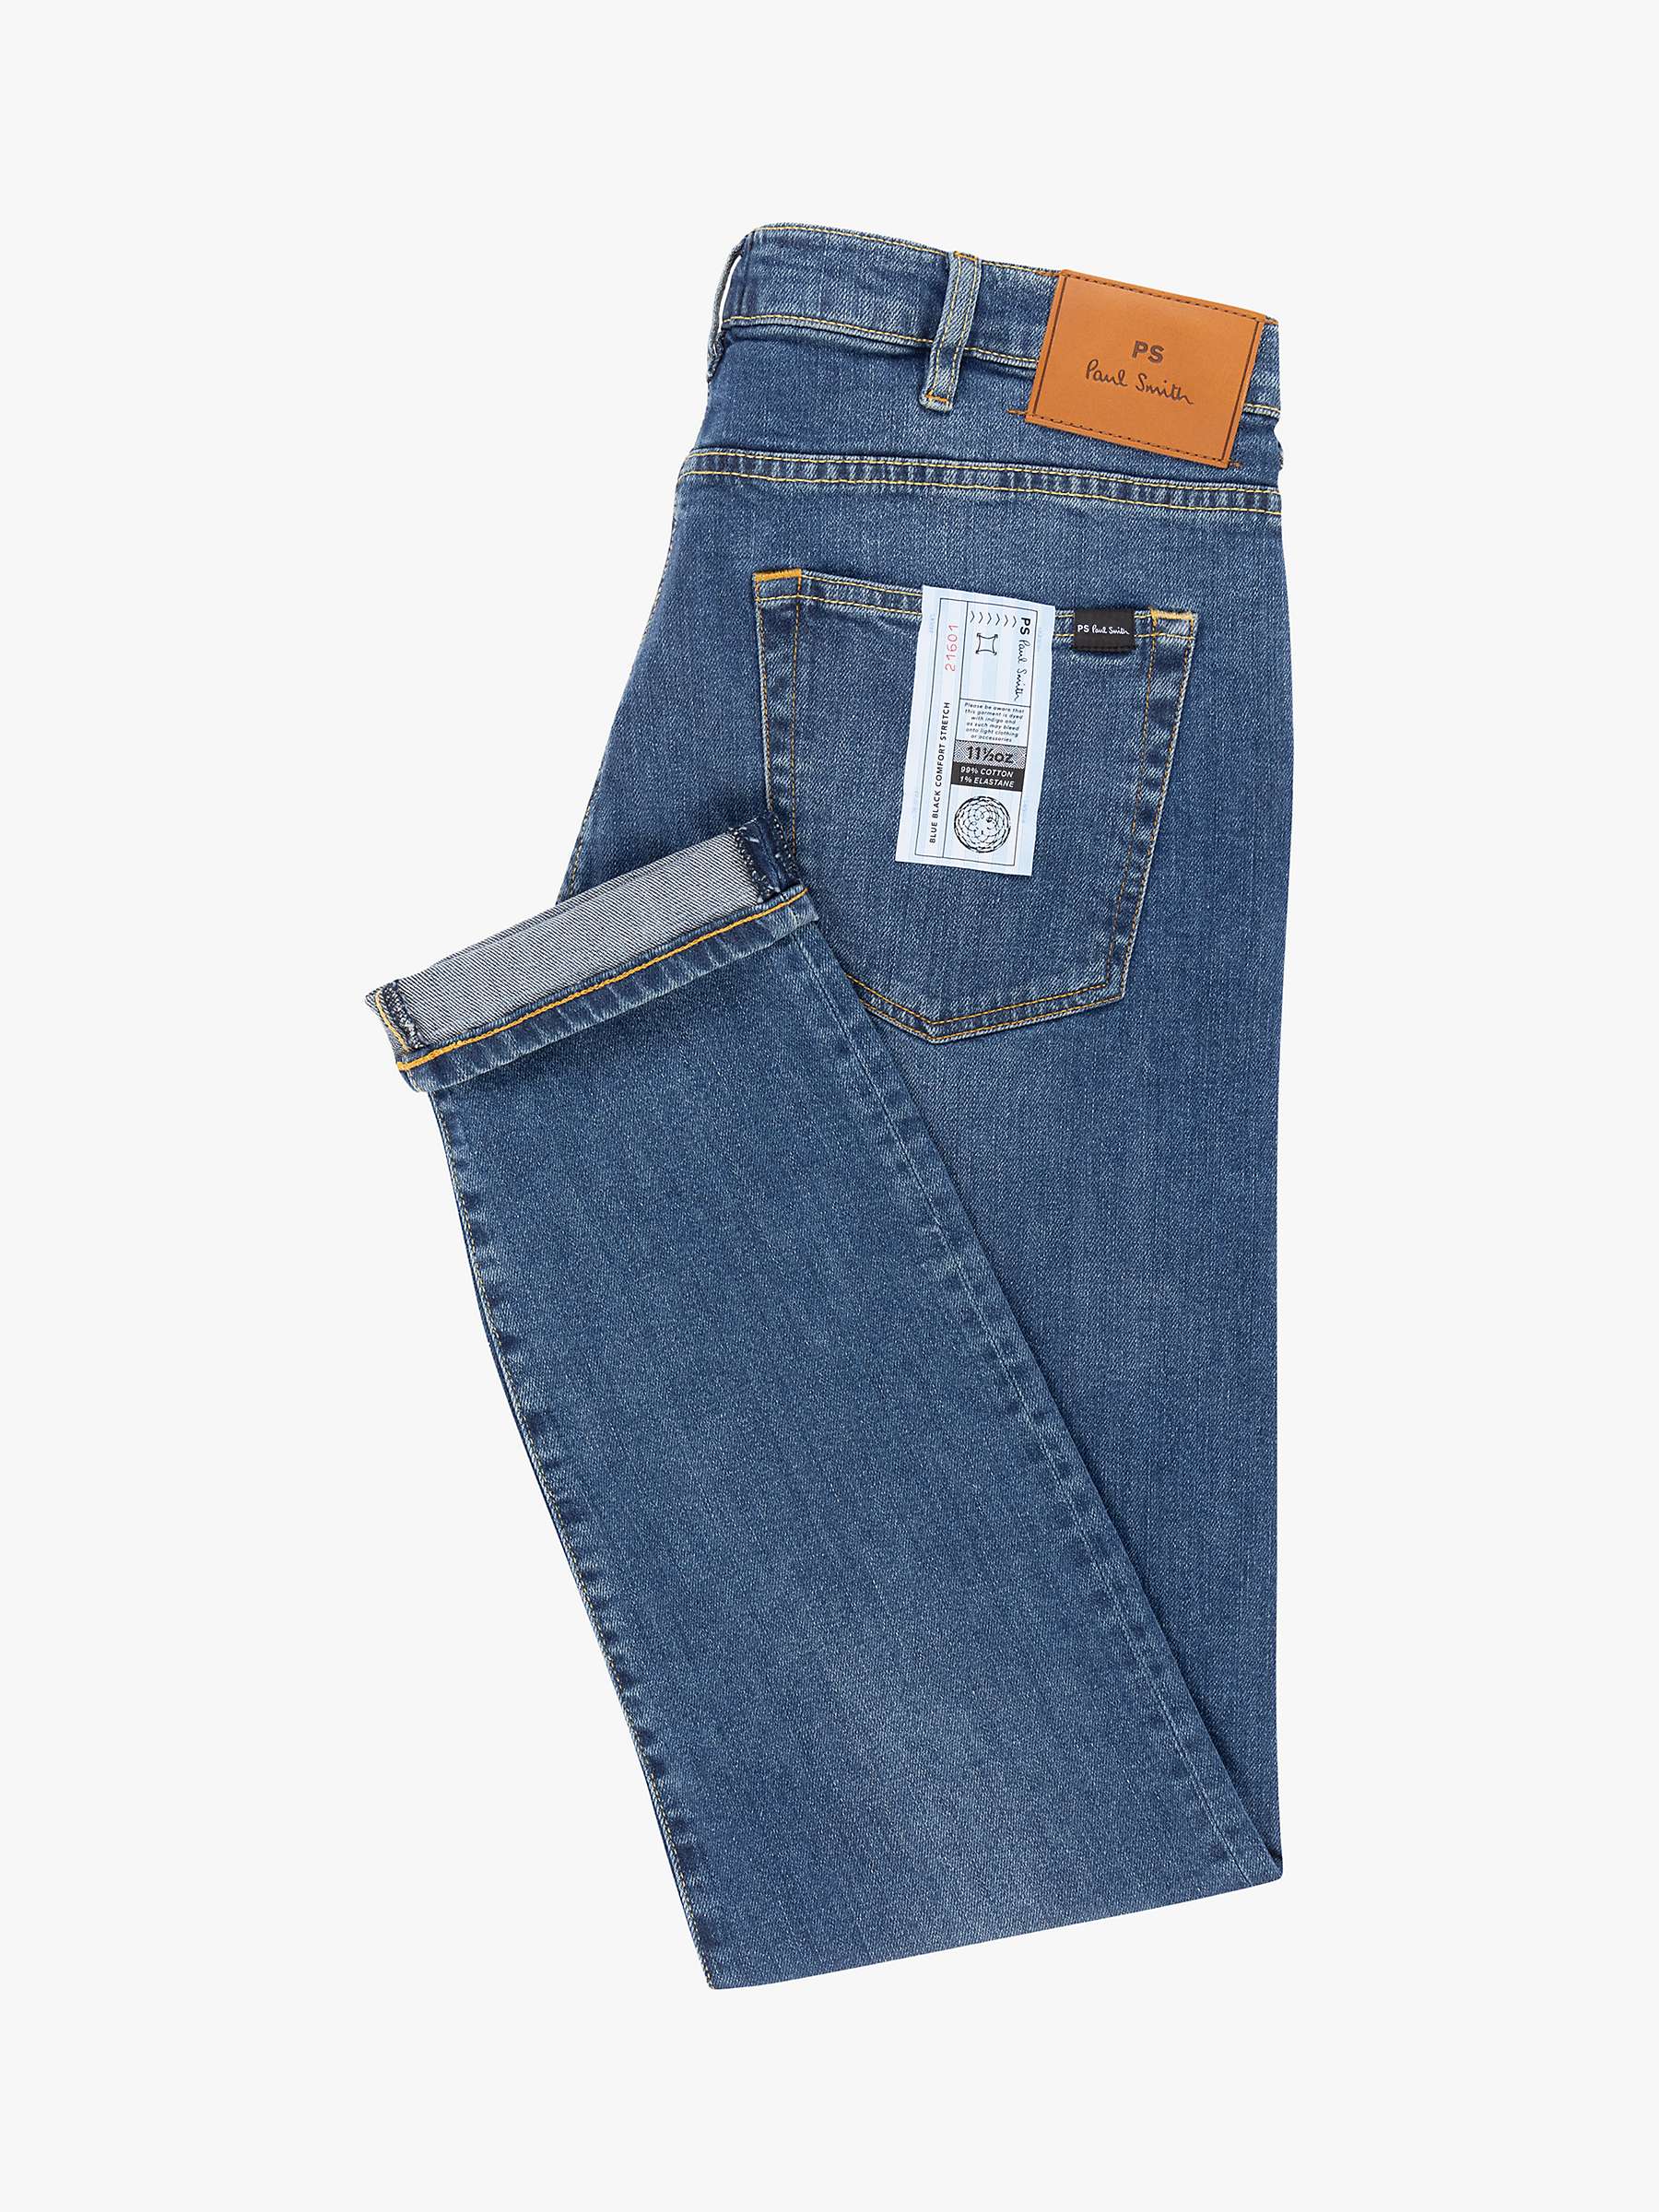 Buy Paul Smith Tapered Fit Jeans, Blue Online at johnlewis.com